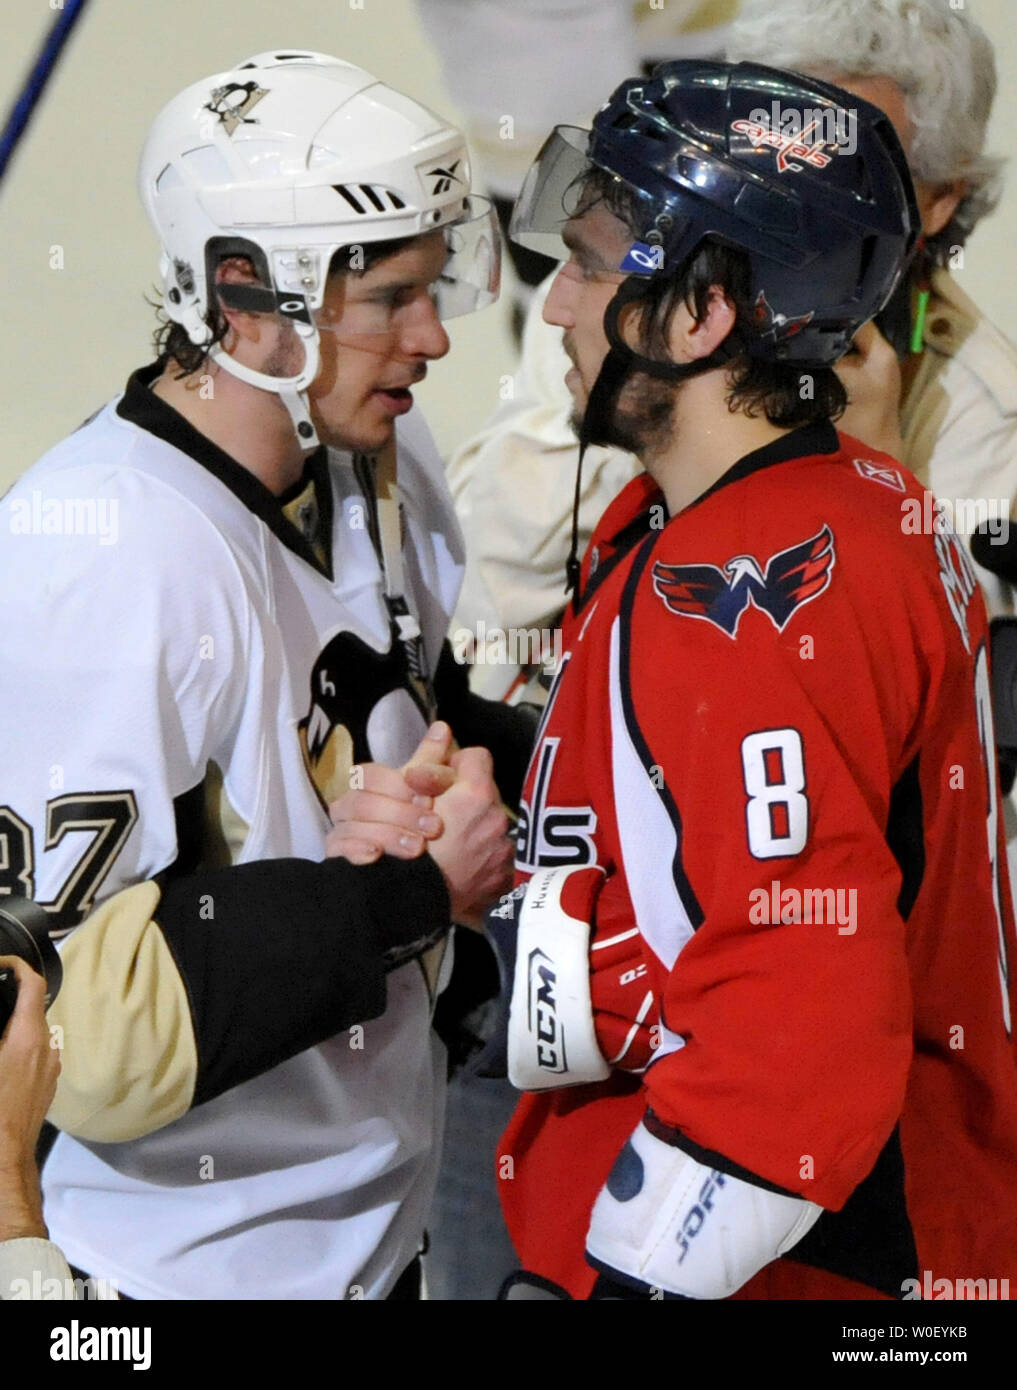 We finally know what happened to the signed Ovechkin/Crosby jersey from  All-Star challenge - HockeyFeed